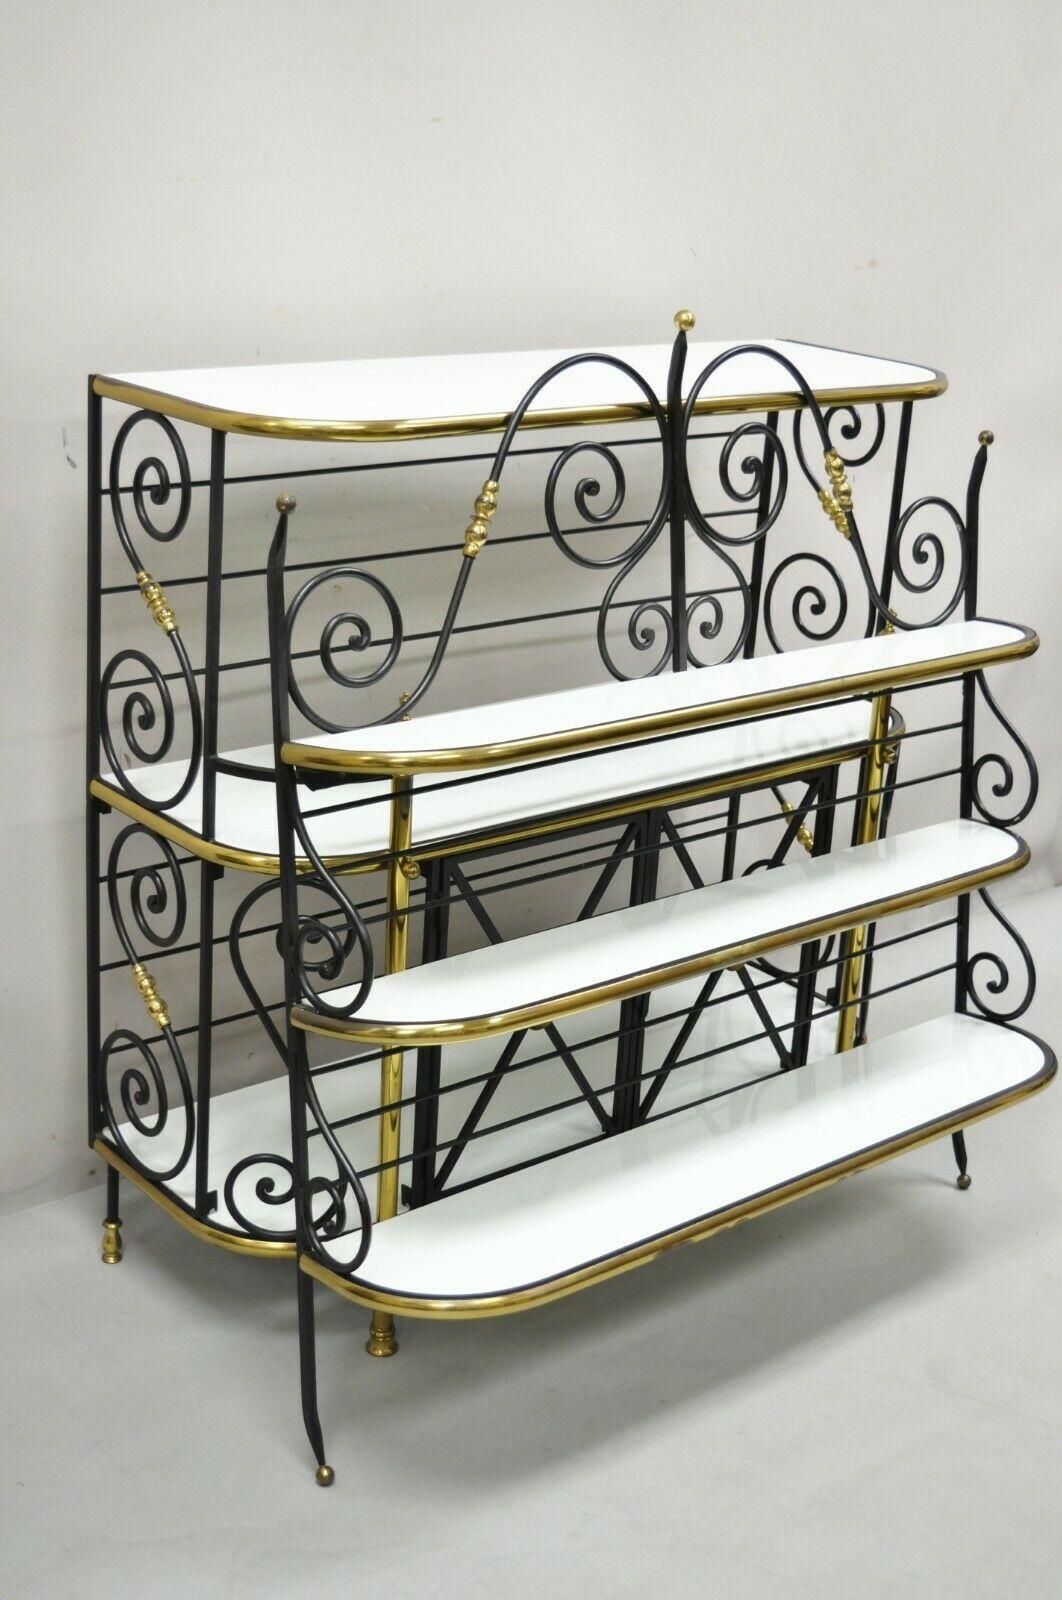 Vintage Country French Bakers rack wrought iron and brass, wall mount cabinet. Item features (1) wall hanging upper section, (1) free standing lower section, wrought iron construction, brass accents, white vitrolite milk glass graduating shelves, 2